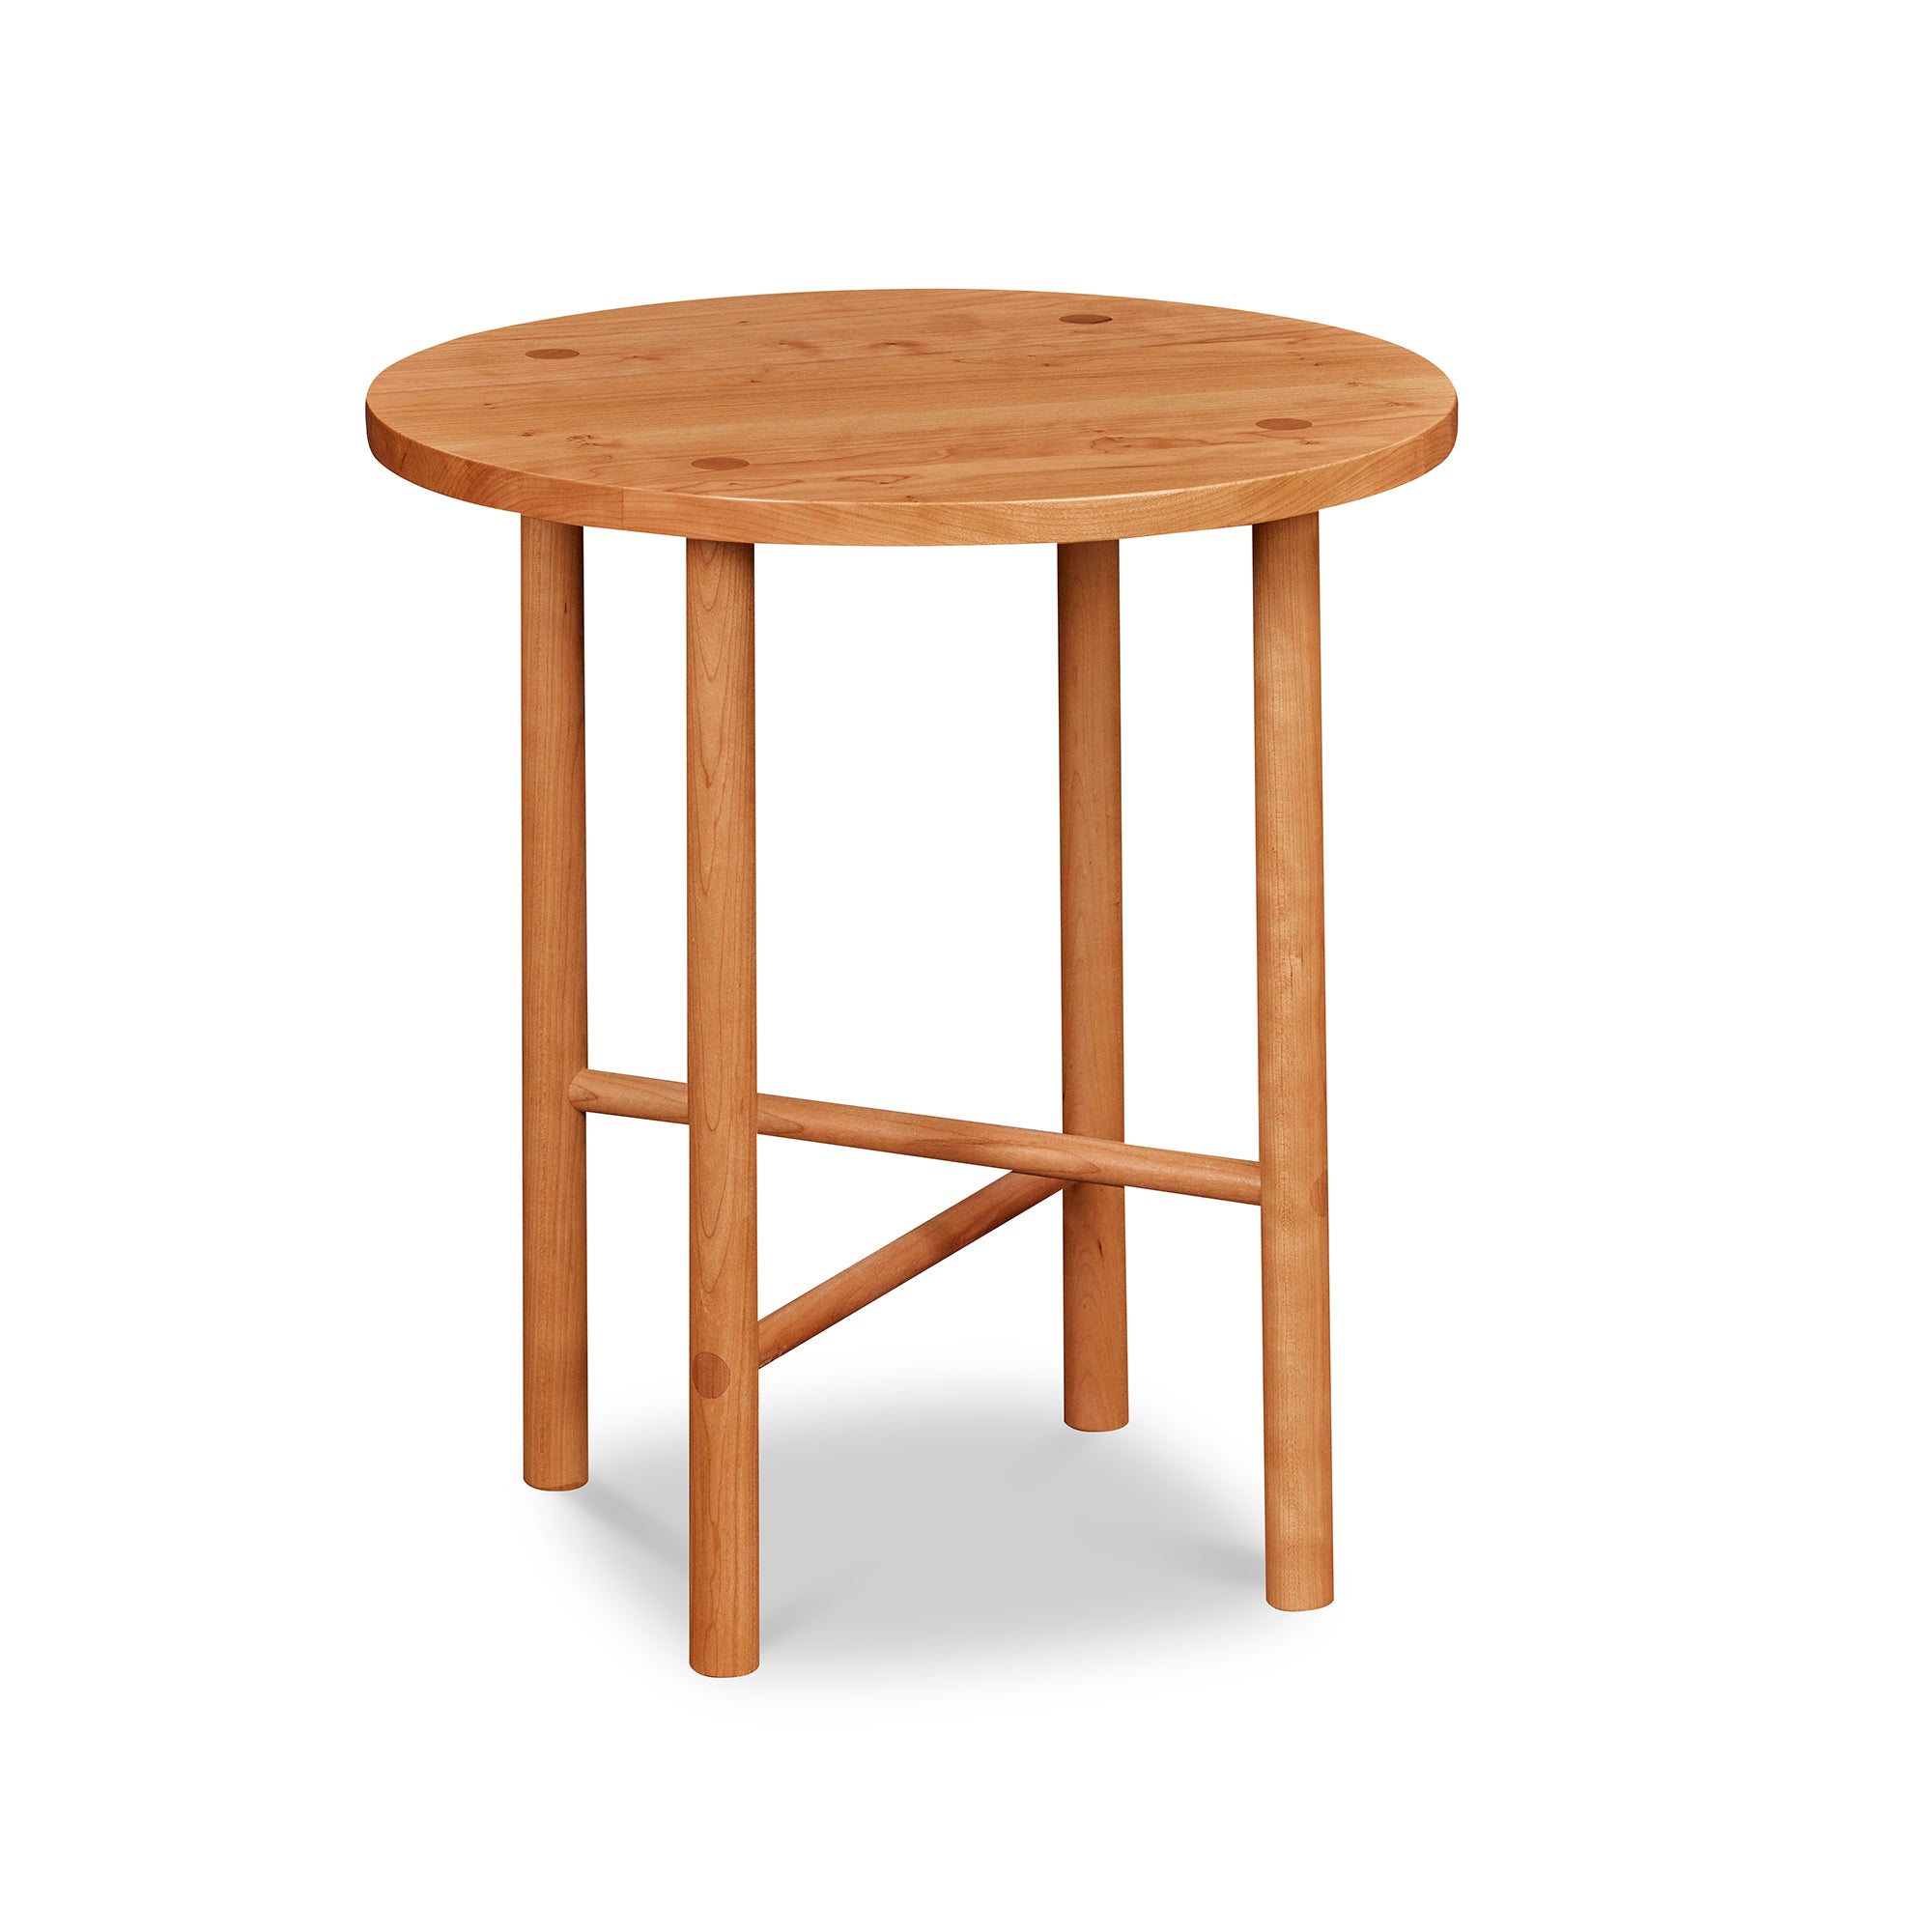 Round Scandinavian style end table with round legs in cherry